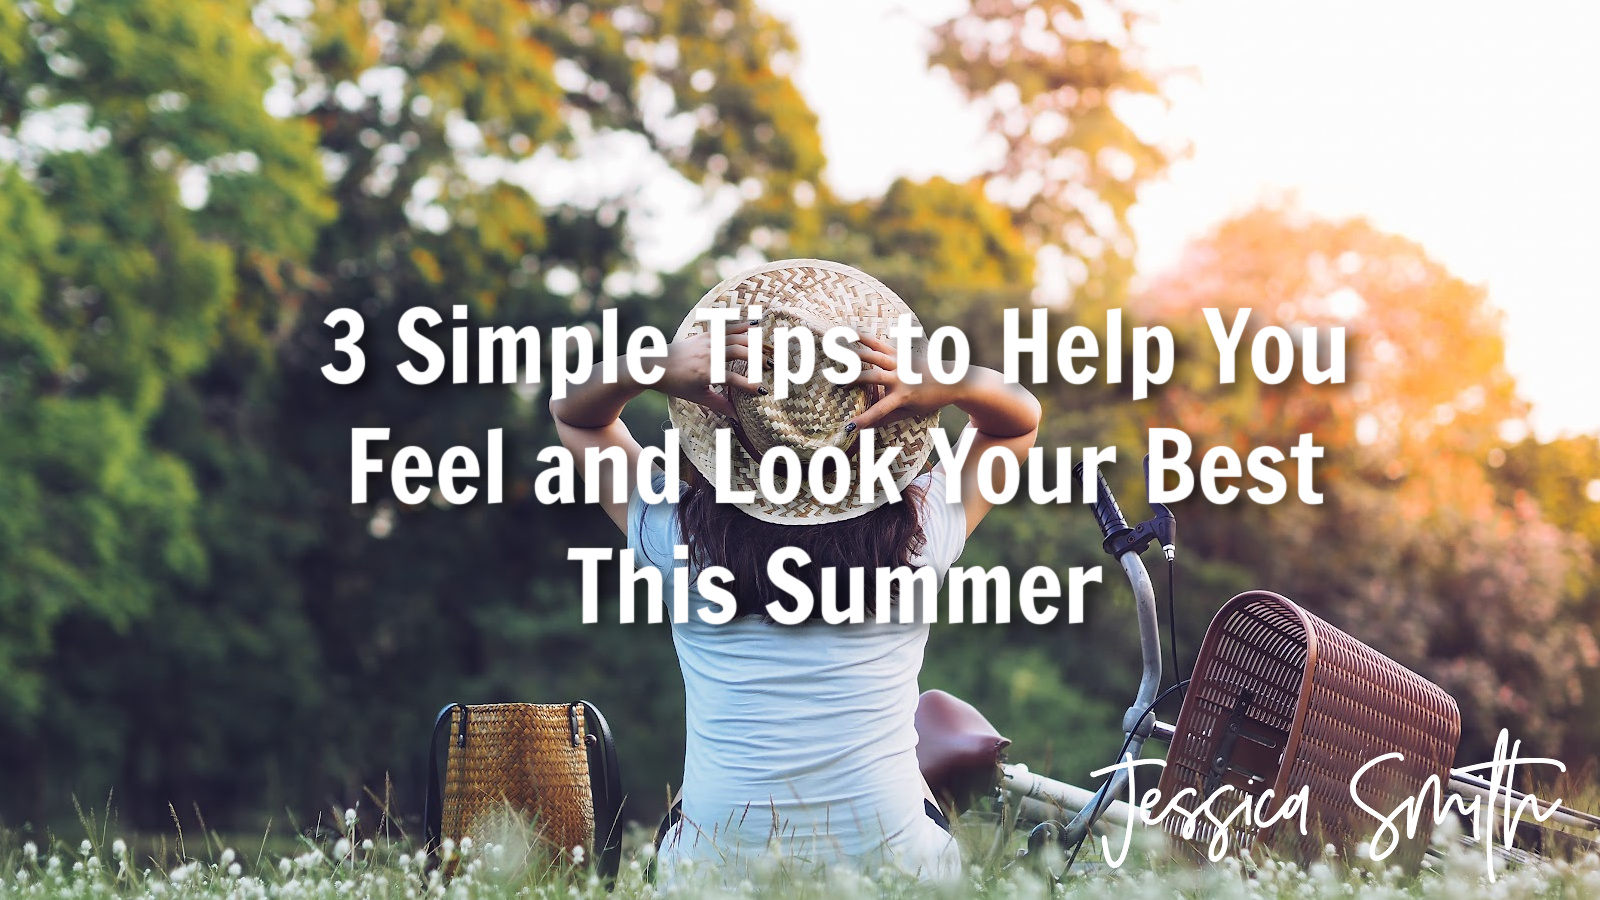 3 Simple Tips to Help You Feel and Look Your Best This Summer